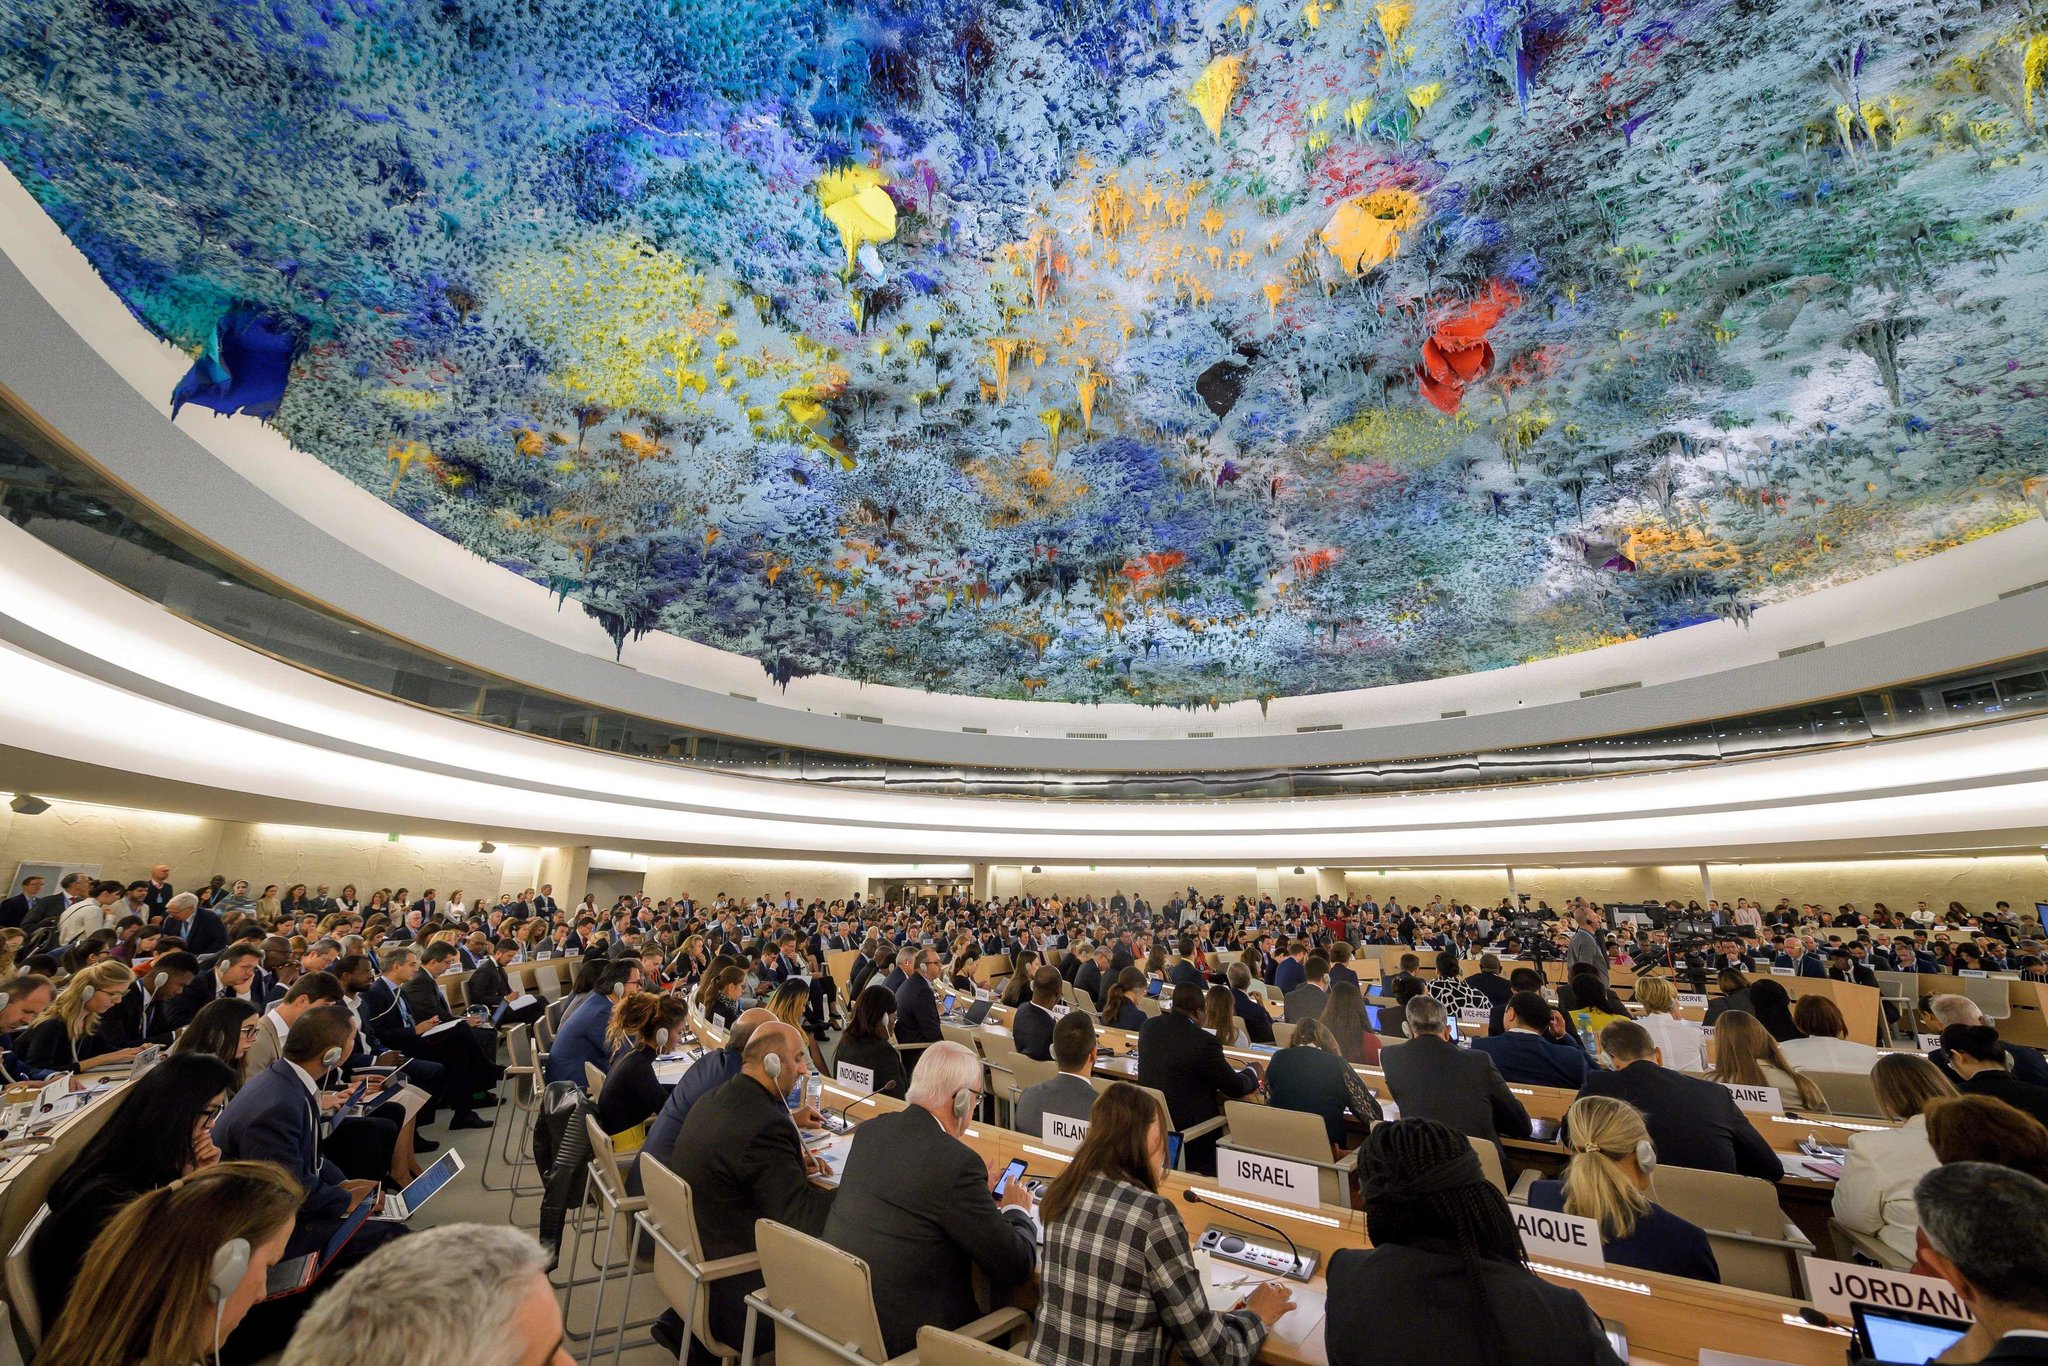 The United States Plans to Return to the Un Human Rights Council!